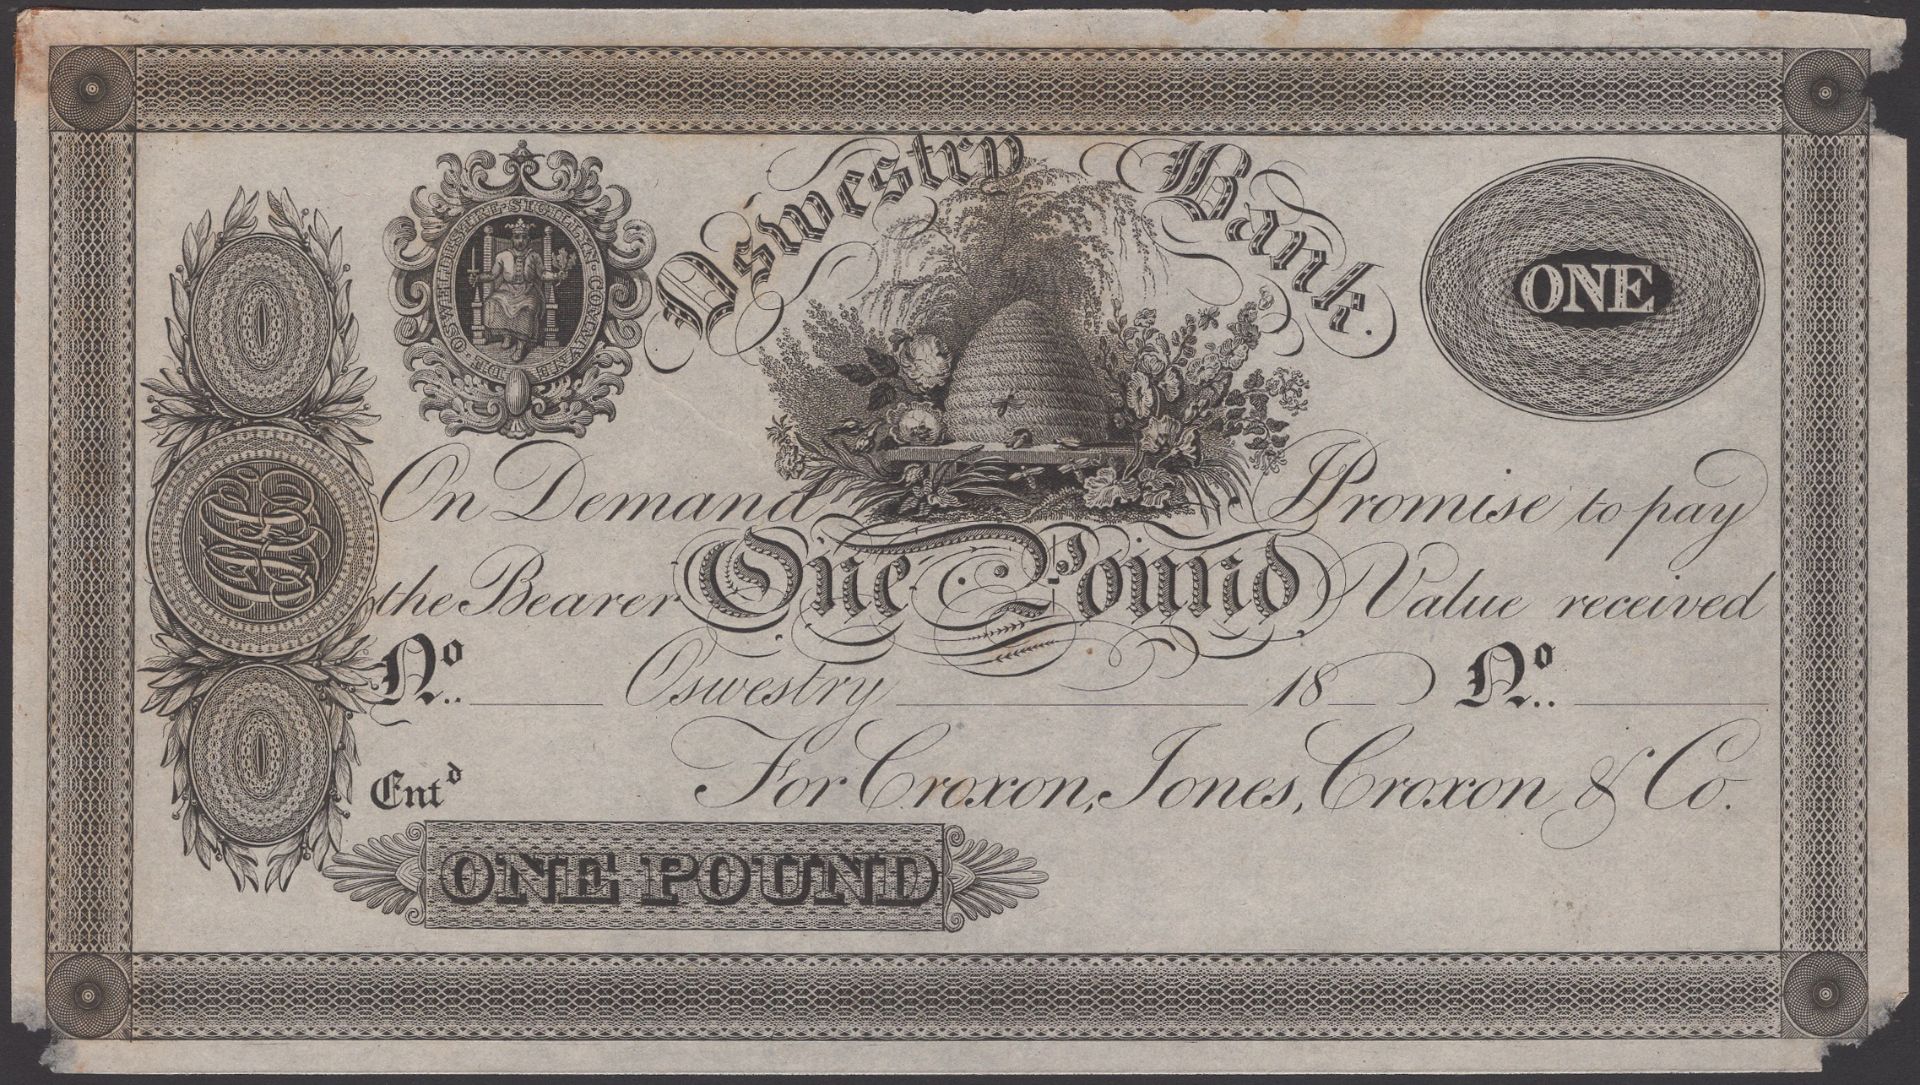 Oswestry Bank, for Croxon, Jone, Croxon & Co., proof Â£1, 18-, no signature or serial number,...